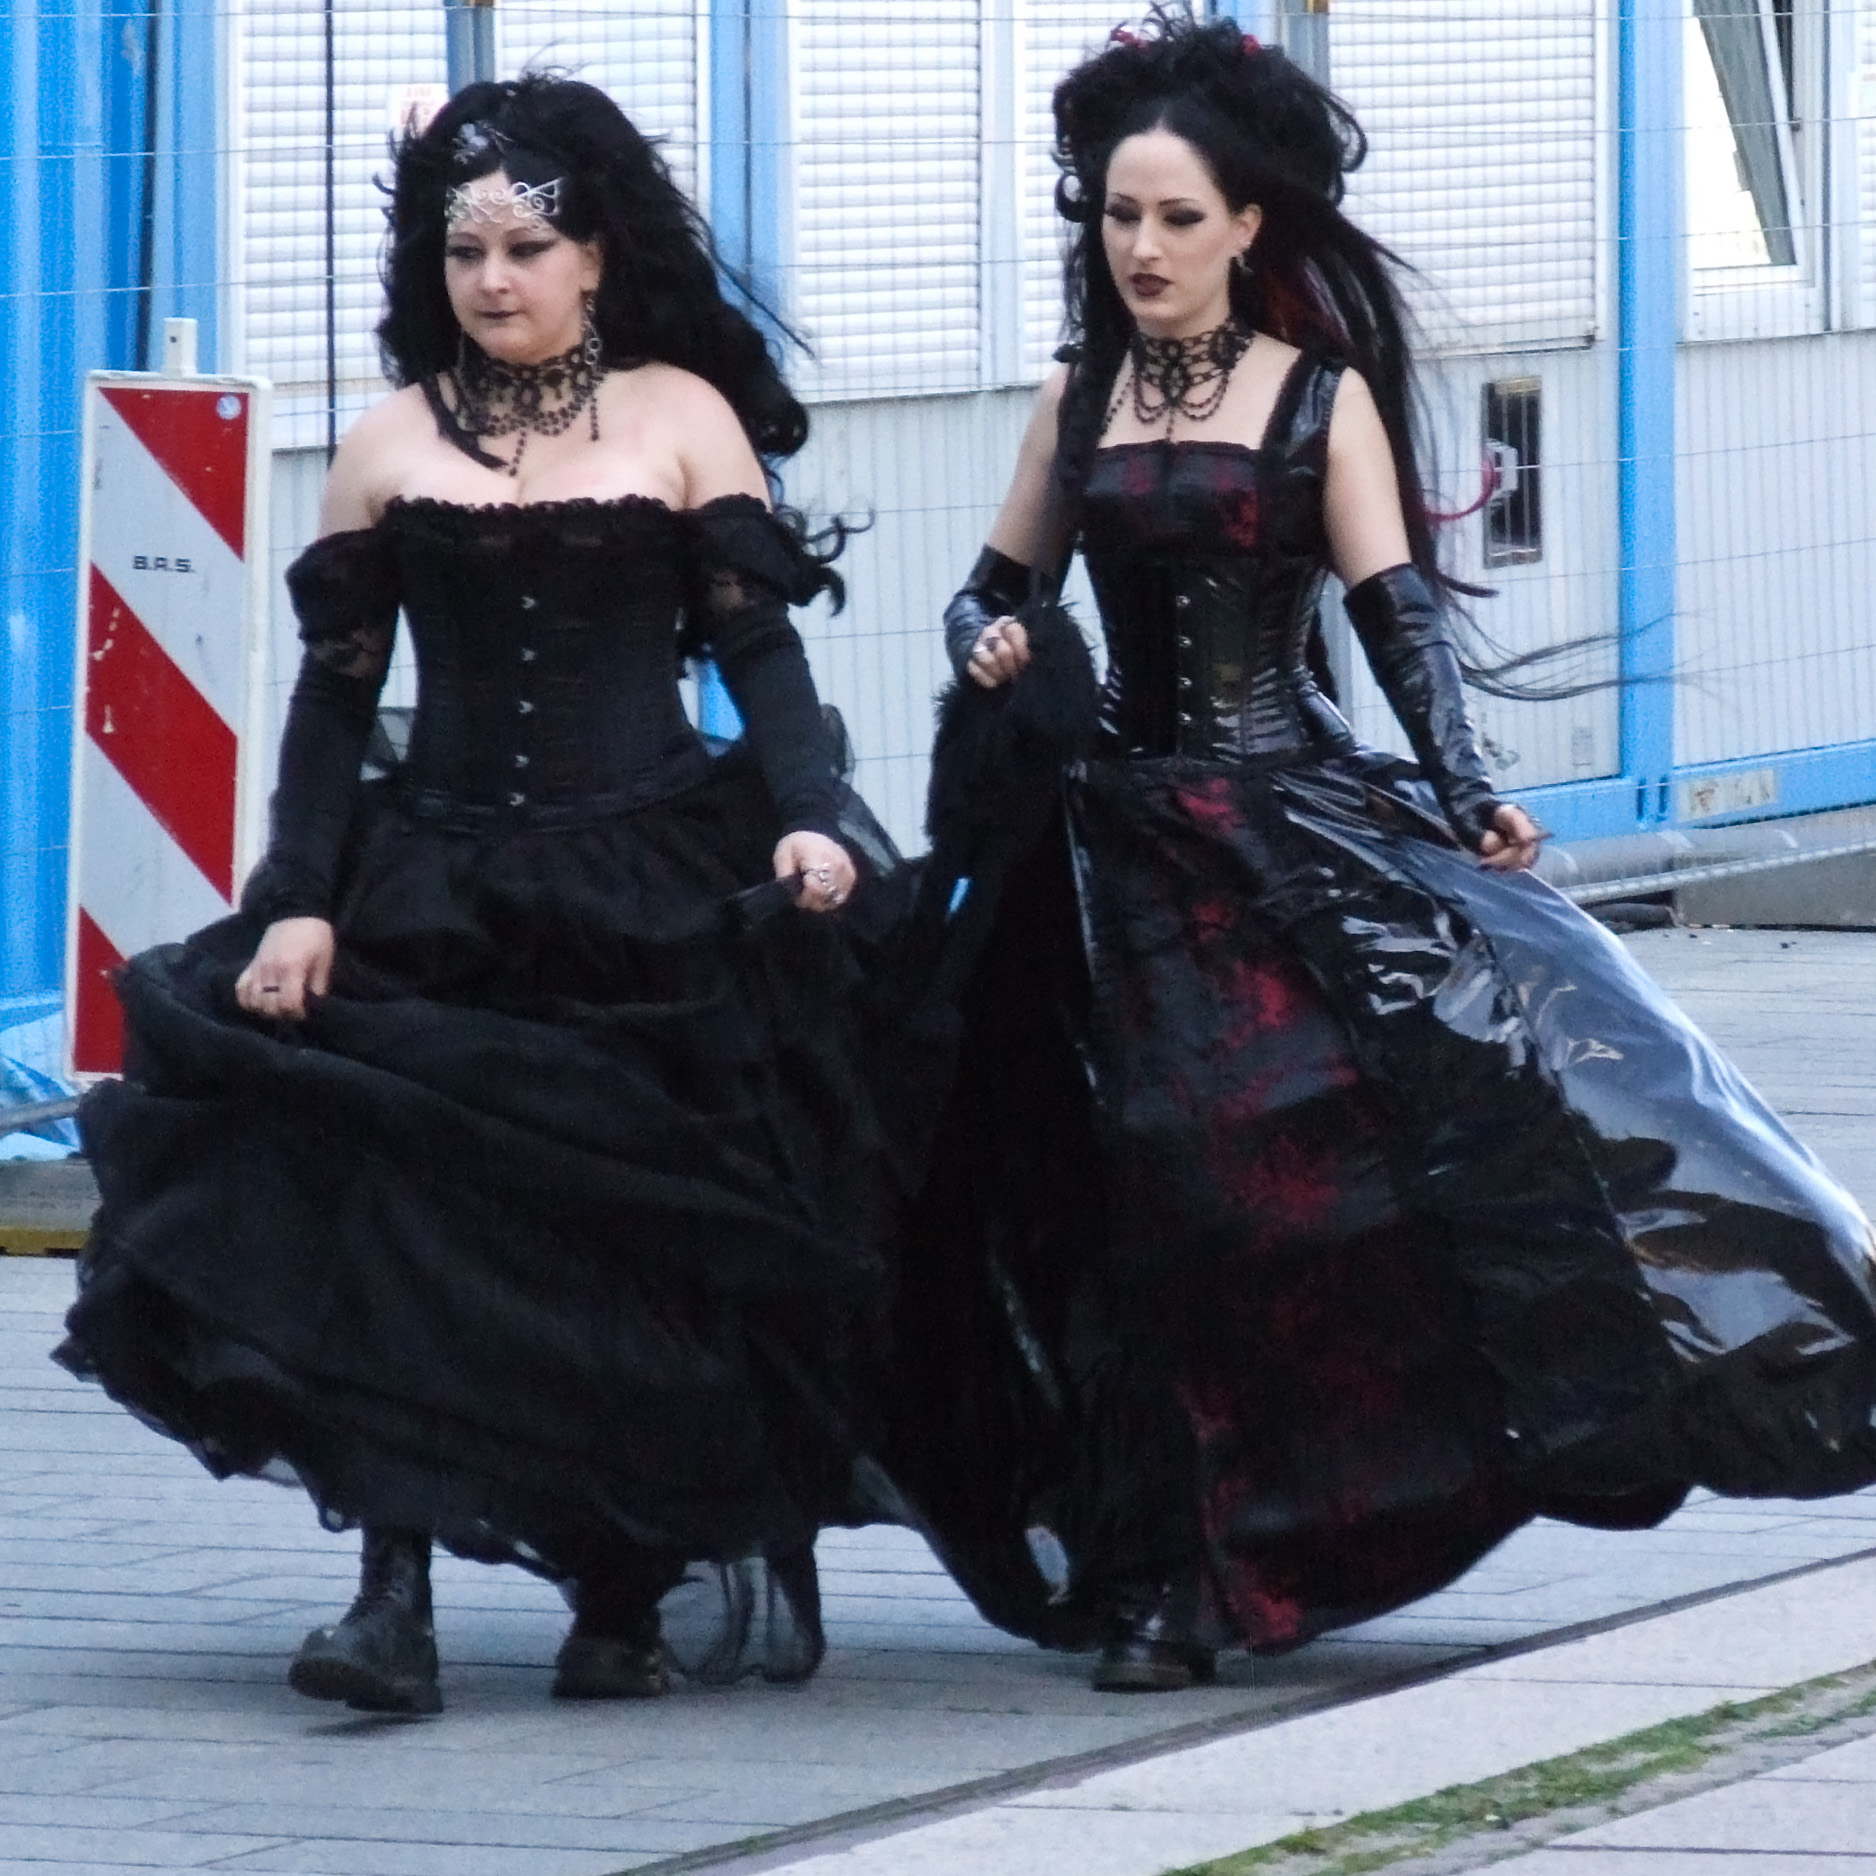 Wave Gothic Convention